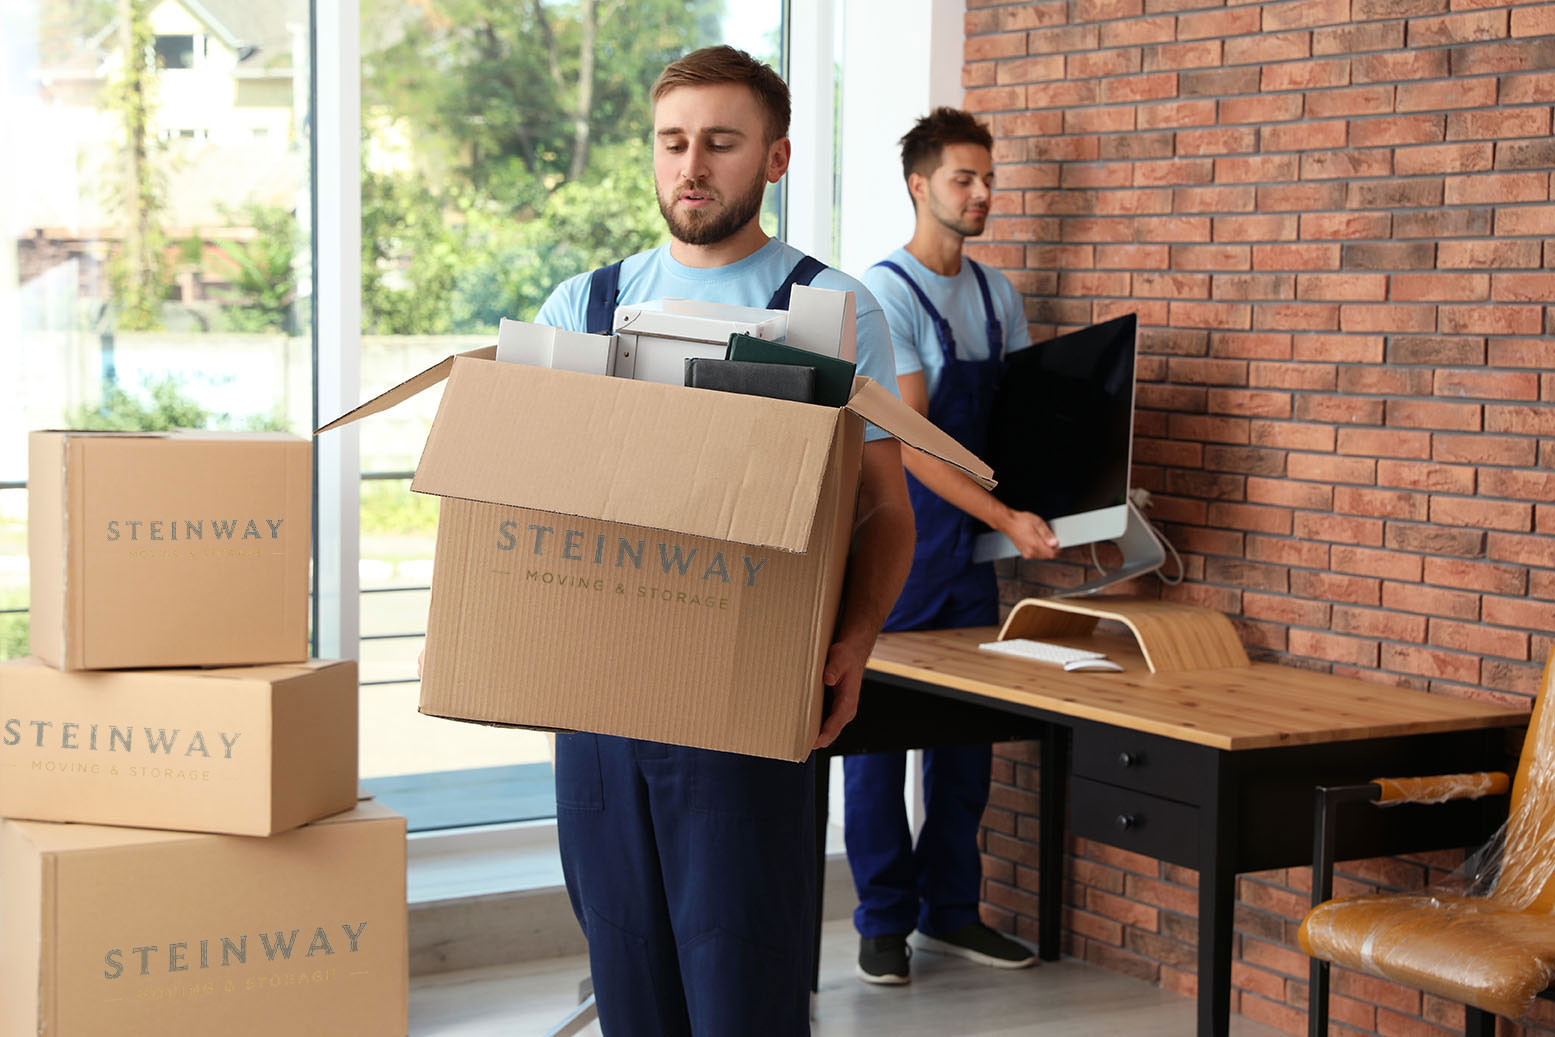 Movers carrying boxes and office equipment